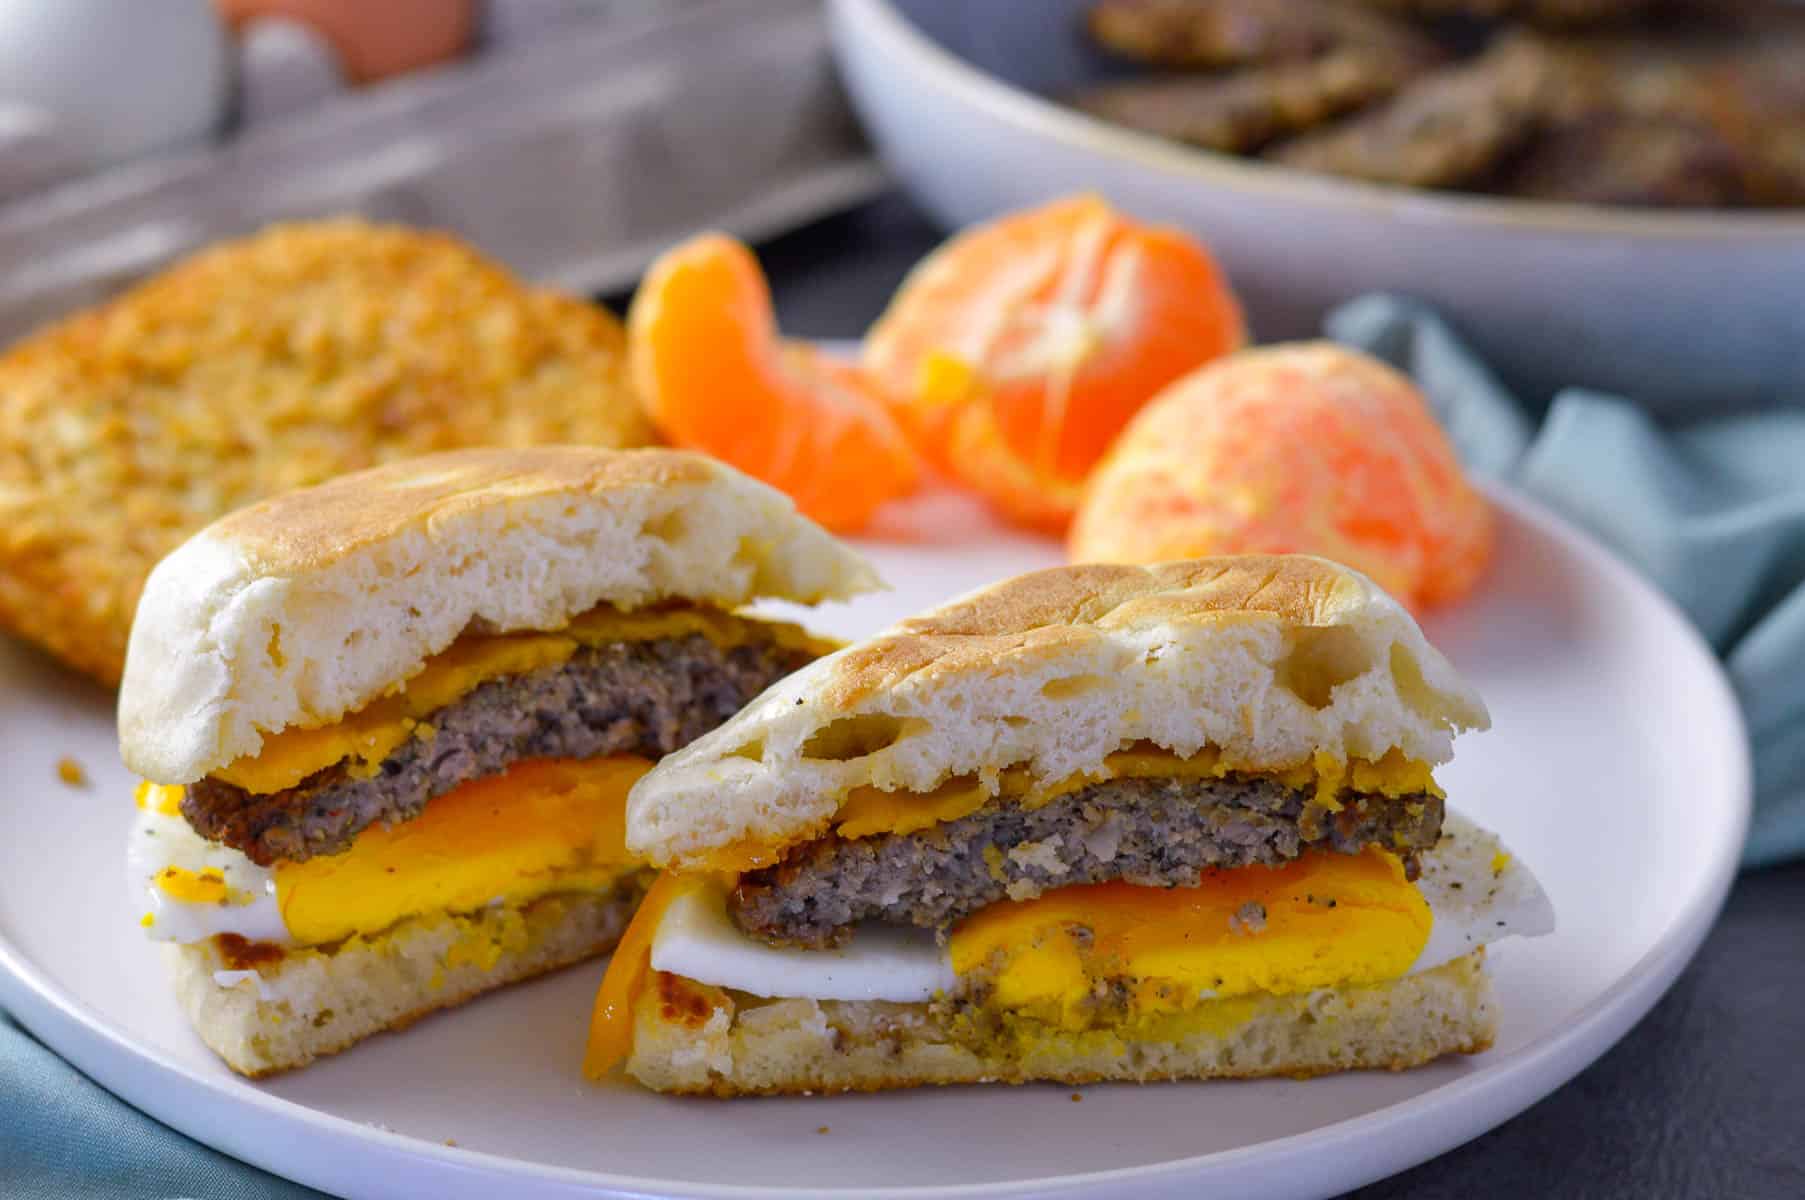 Breakfast sausage sandwich with fried egg and cheese on English muffin cut in half with hash brown patty and mandarin on white plate. Carton of fresh eggs and bowl of sausage patties in background